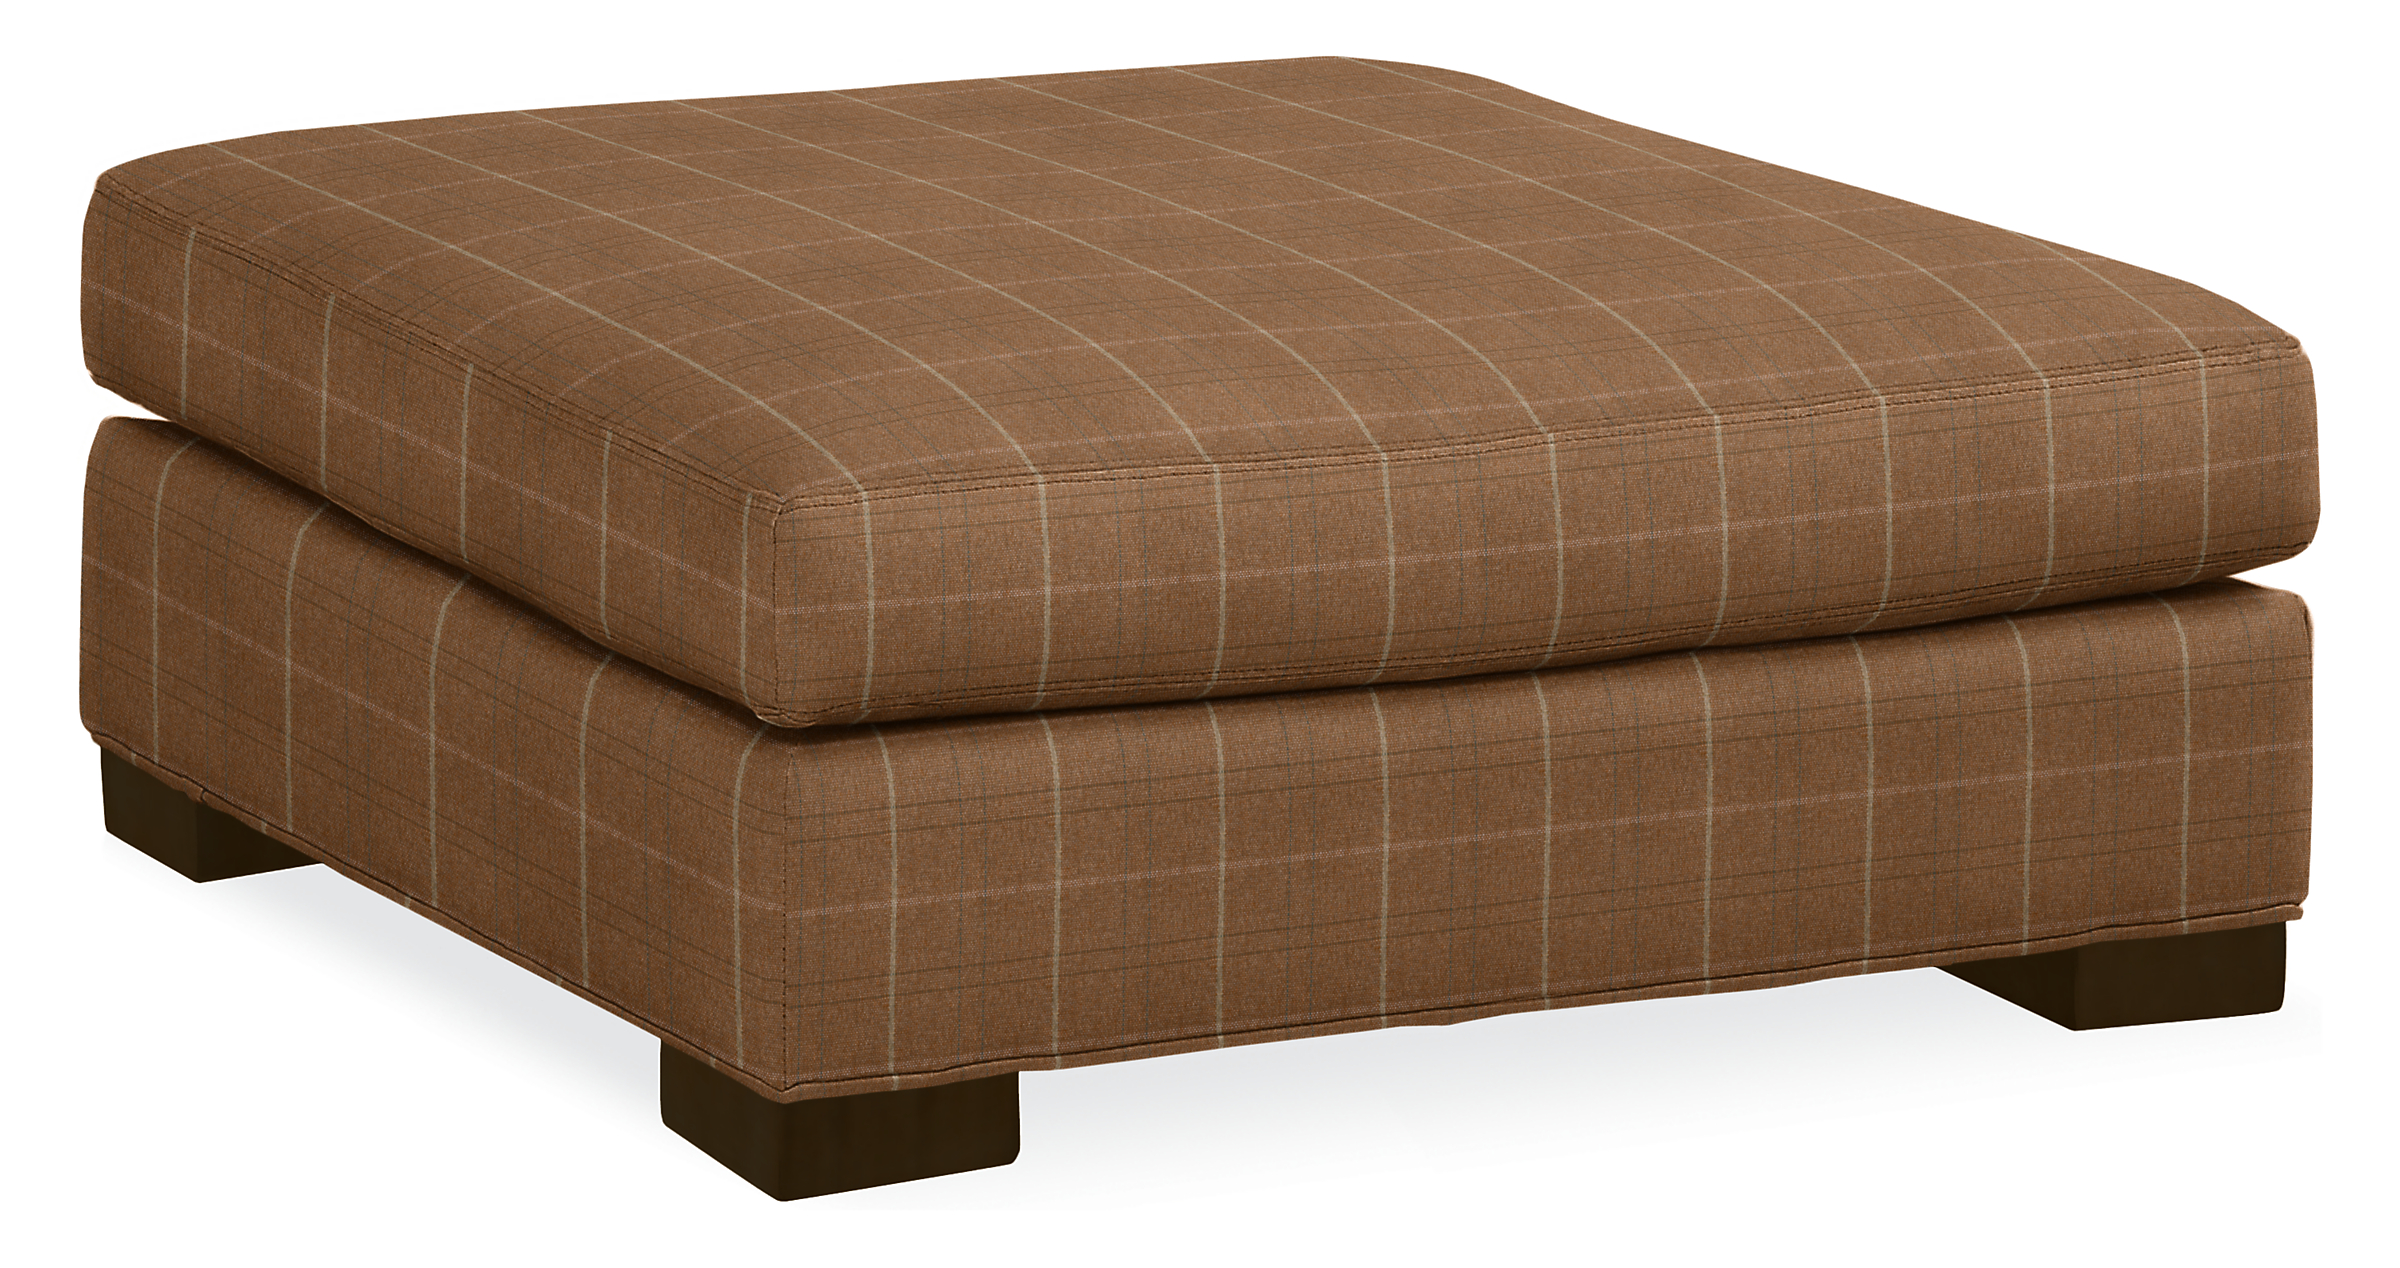 Metro 38w 38d 17h Square Ottoman in Kivett Cognac with Charcoal Legs